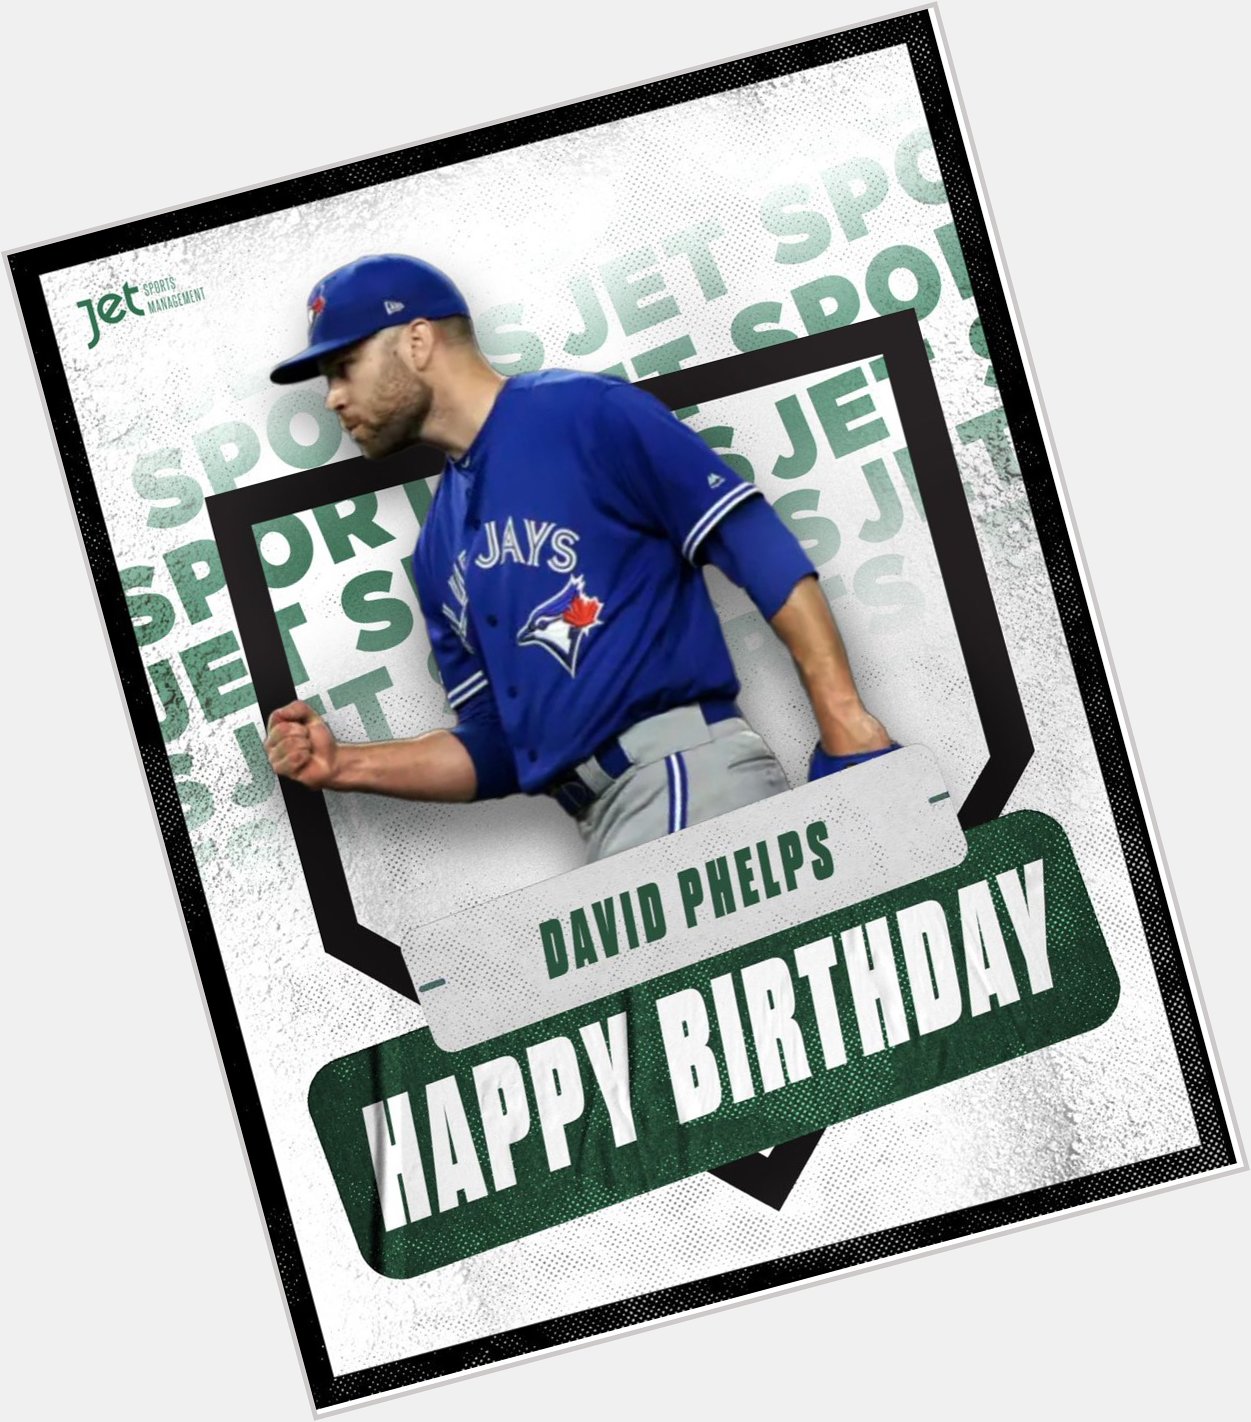 Happy Birthday to Pitcher David Phelps. We hope you have a great one! 